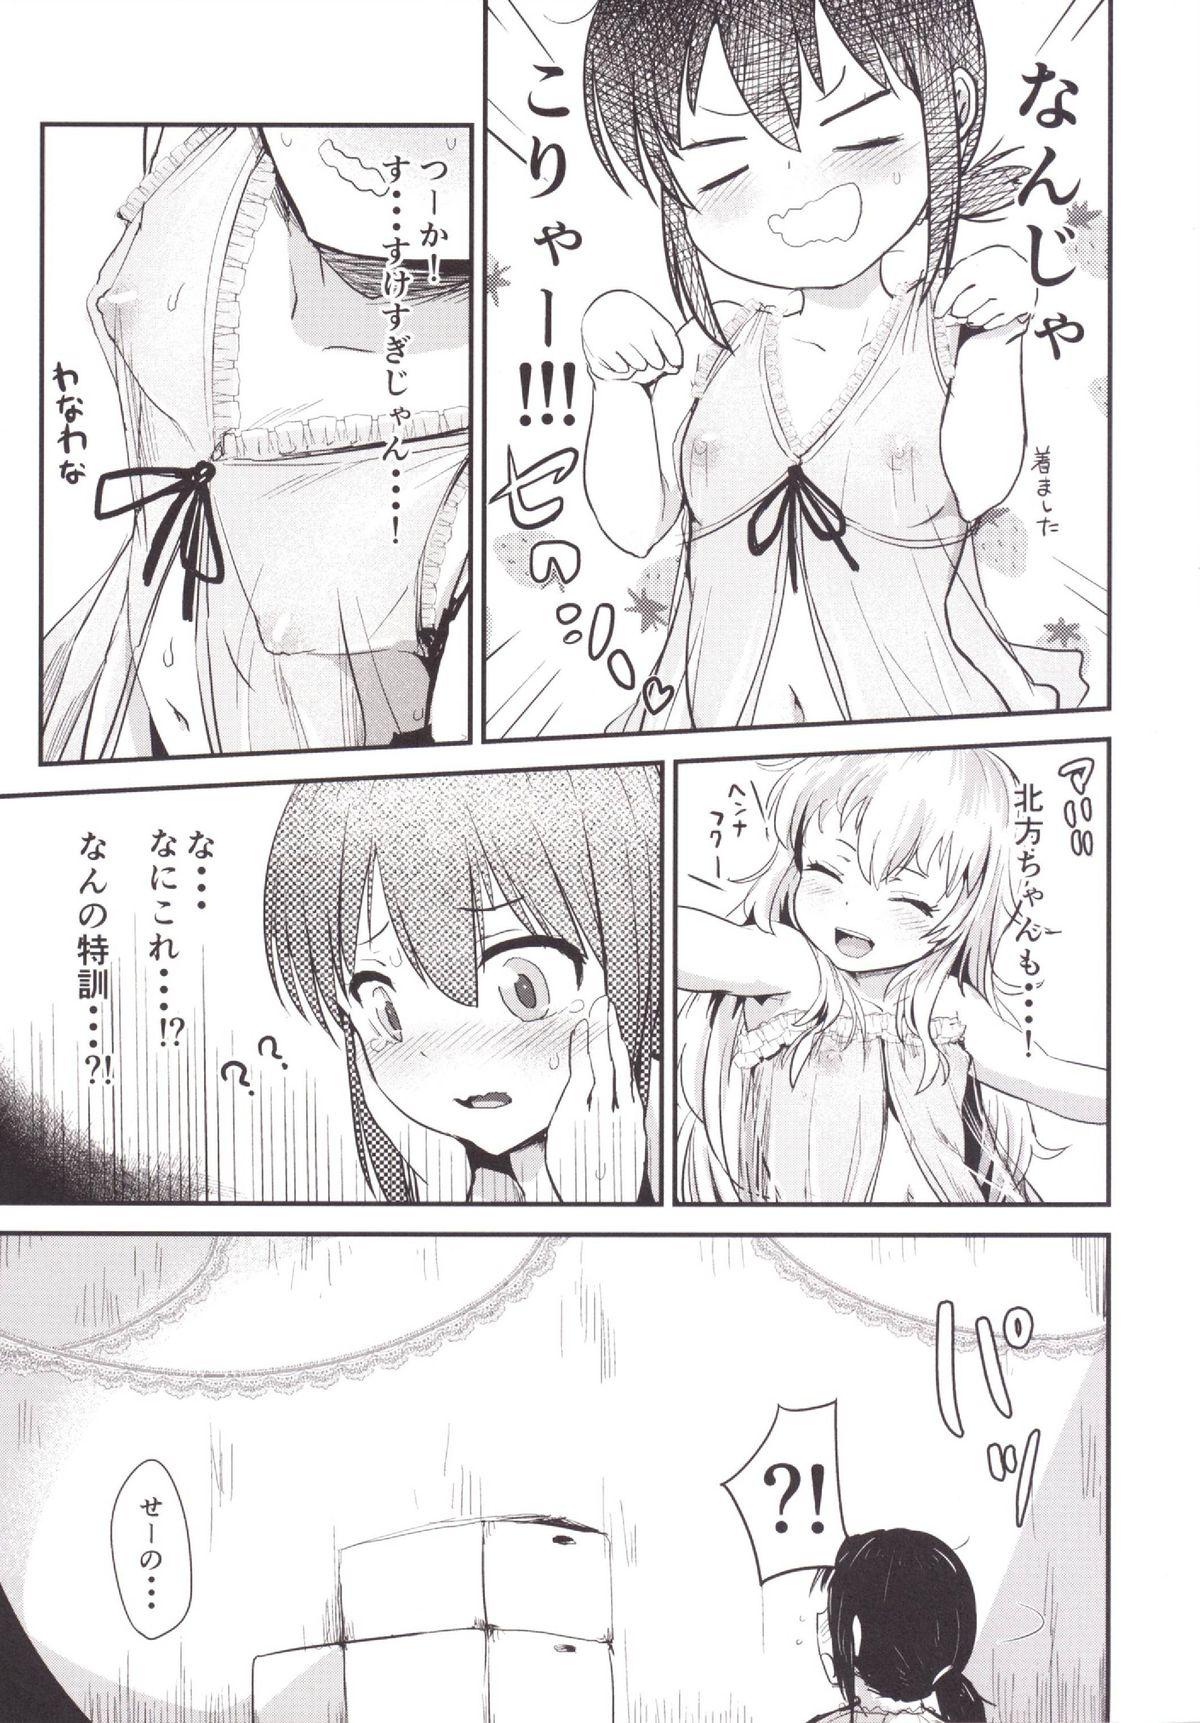 Cumming Kuchikukan Loliloli Fuuzoku e Youkoso! - Welcome to the destroyer's sex party - Kantai collection Step - Page 8